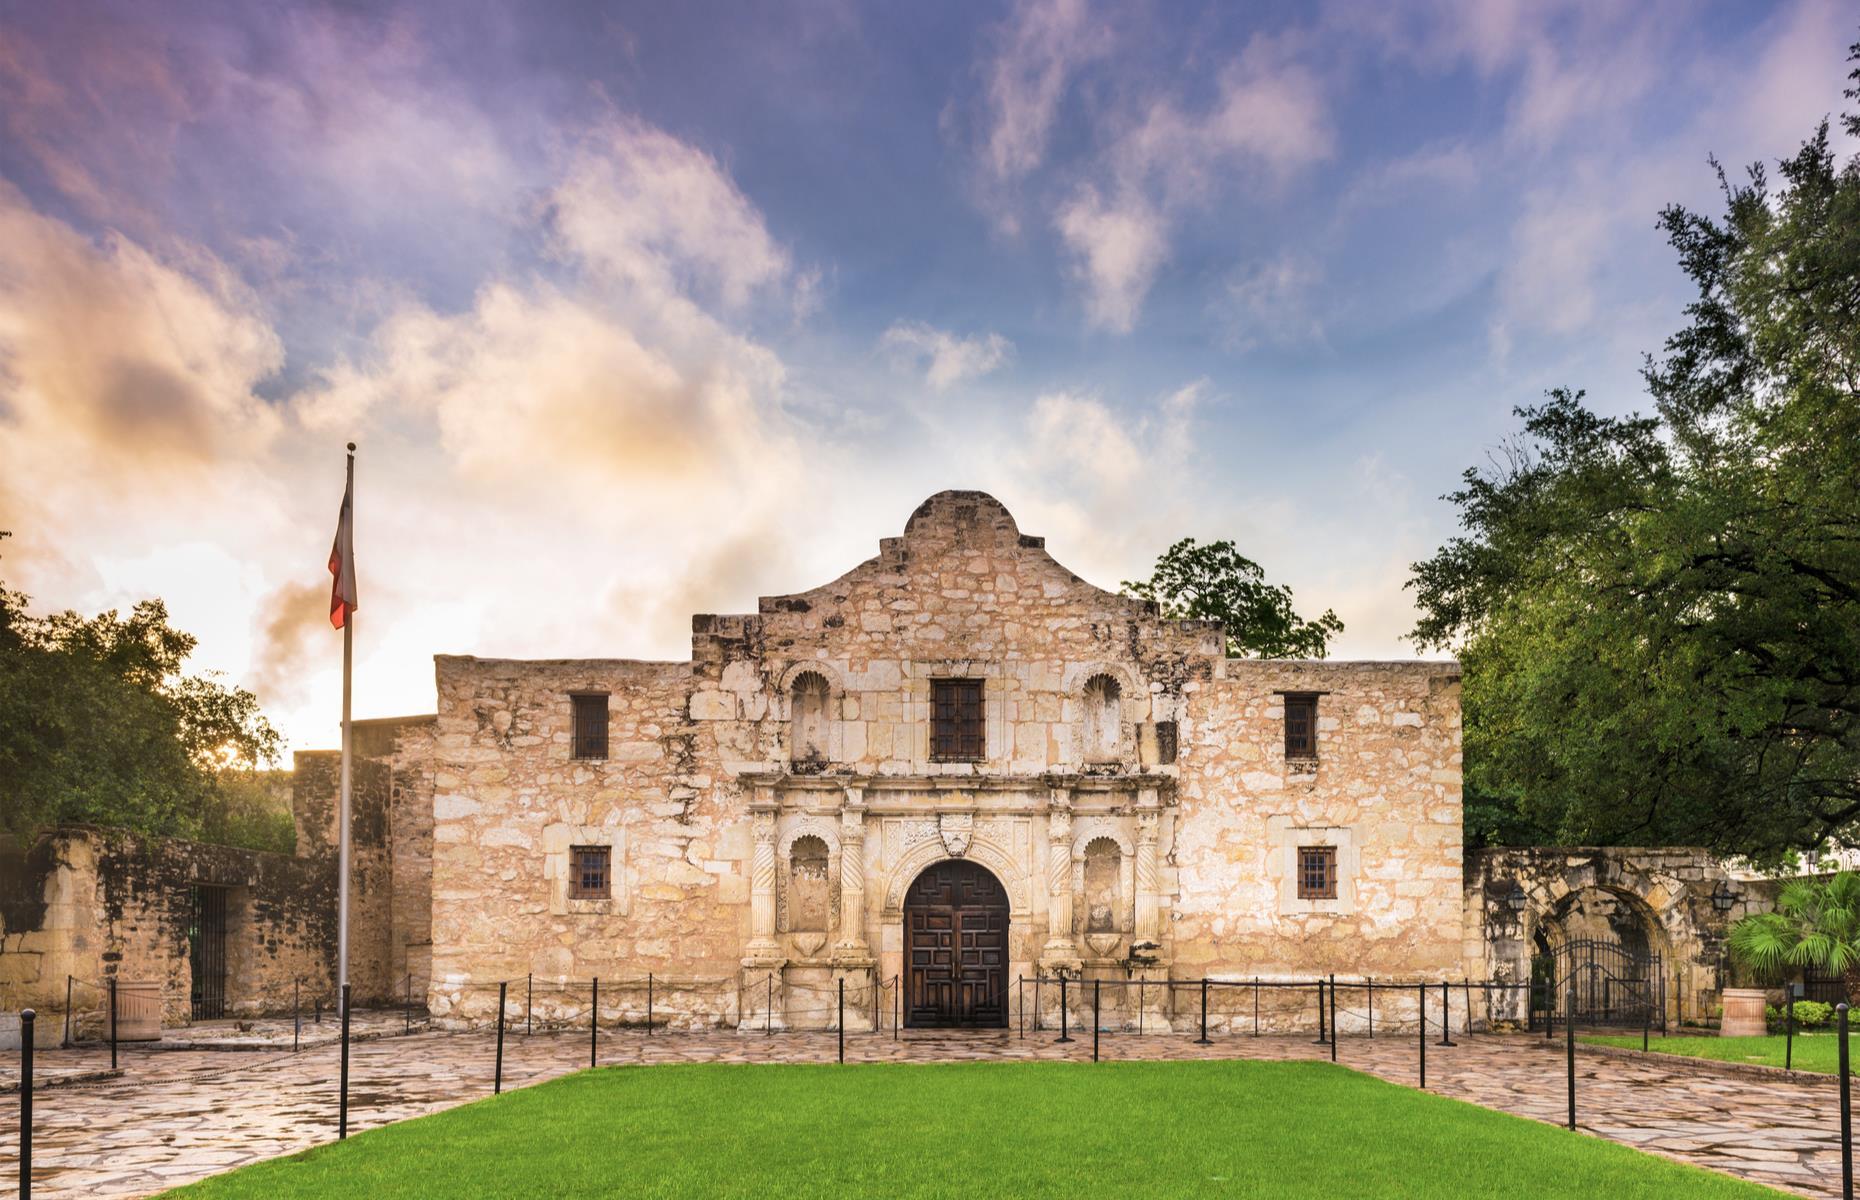 <p>San Antonio is often named among the most haunted cities in the States, with landmarks including hotels, theaters and cathedrals all said to be host to spooks and spirits. None more so than <a href="https://www.thealamo.org/">The Alamo</a>, though. Hundreds of Texans died here, as Mexican forces captured the fort during the Battle of the Alamo in 1836. The shadows and moans of long-deceased soldiers have been noticed here in the centuries since.</p>  <p><a href="https://www.loveexploring.com/gallerylist/68174/worlds-eeriest-abandoned-hotels-resorts-and-airports"><strong>You won't want to check-in to these abandoned hotels and airports</strong></a></p>